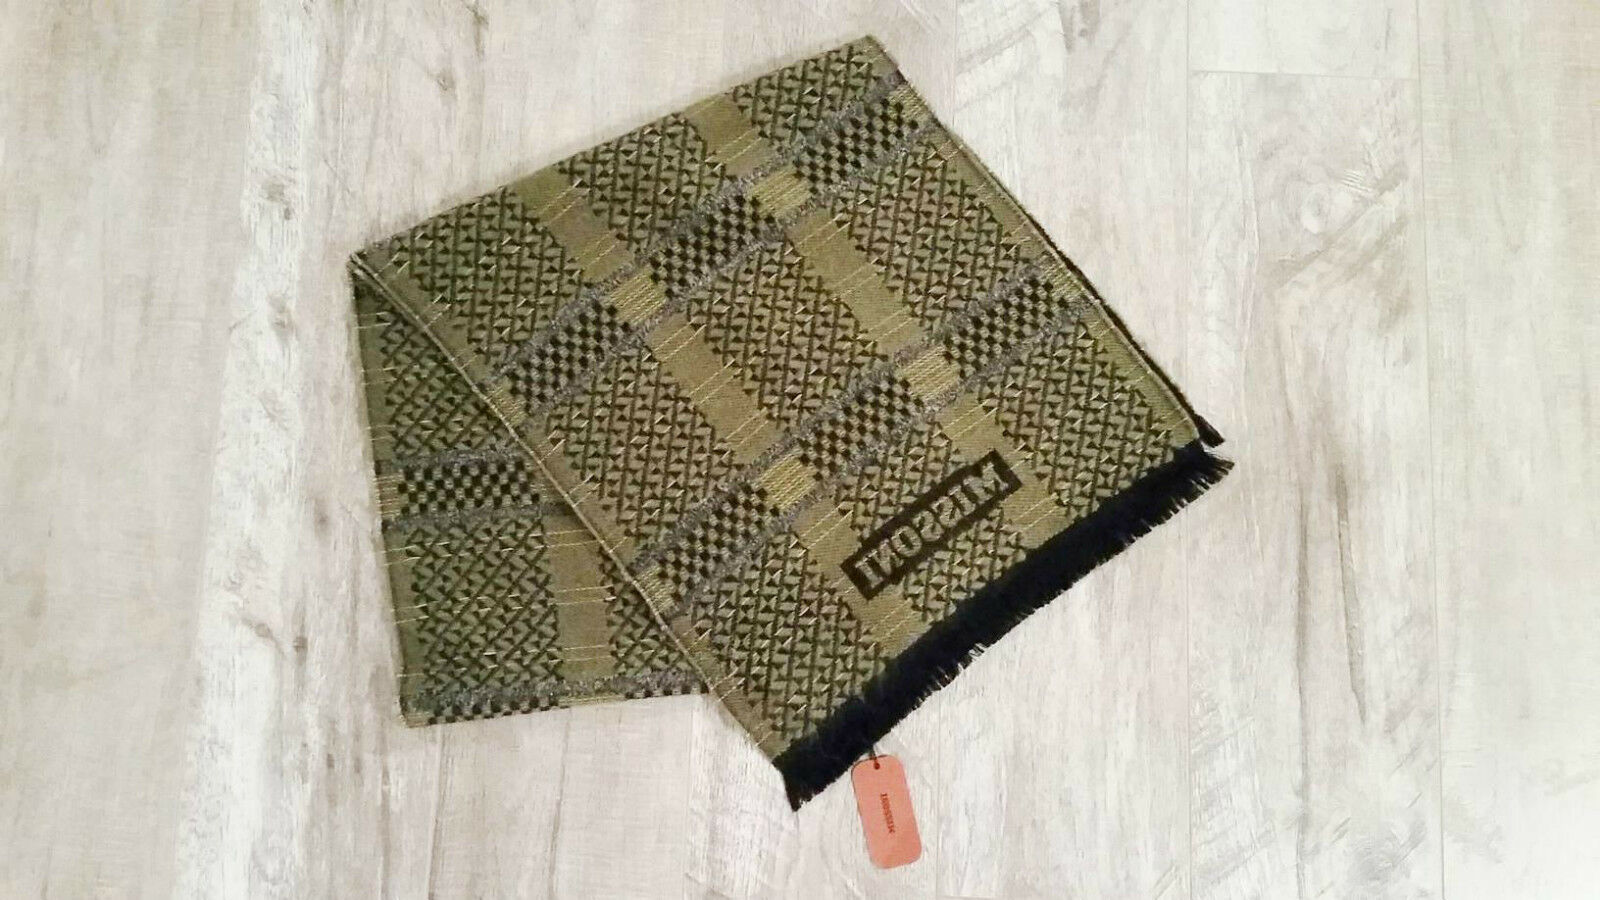 Primary image for MISSONI Italy CHEVRON Pattern Centered FRINGE Trim WOOL Scarf BLACK / ARMY GREEN